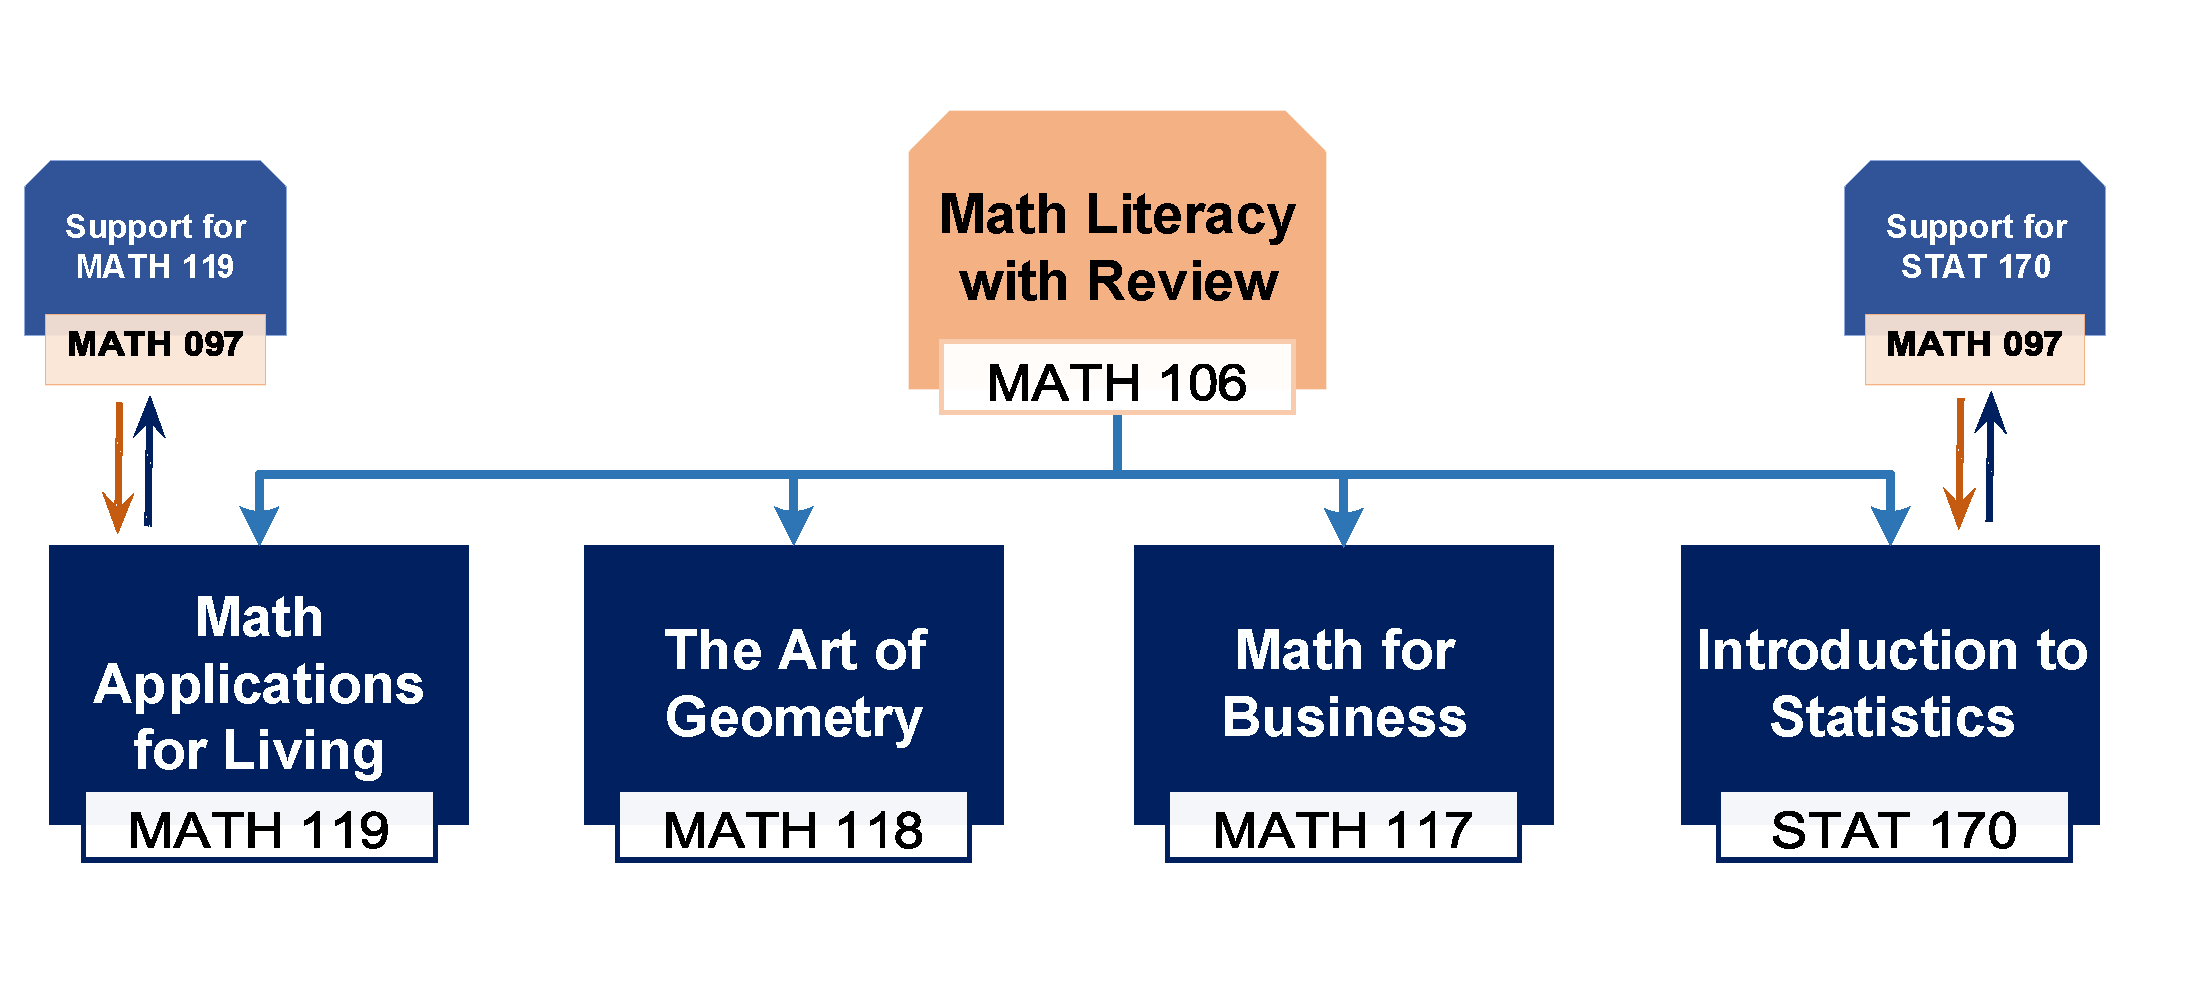 Math Literacy with Review Flowchart